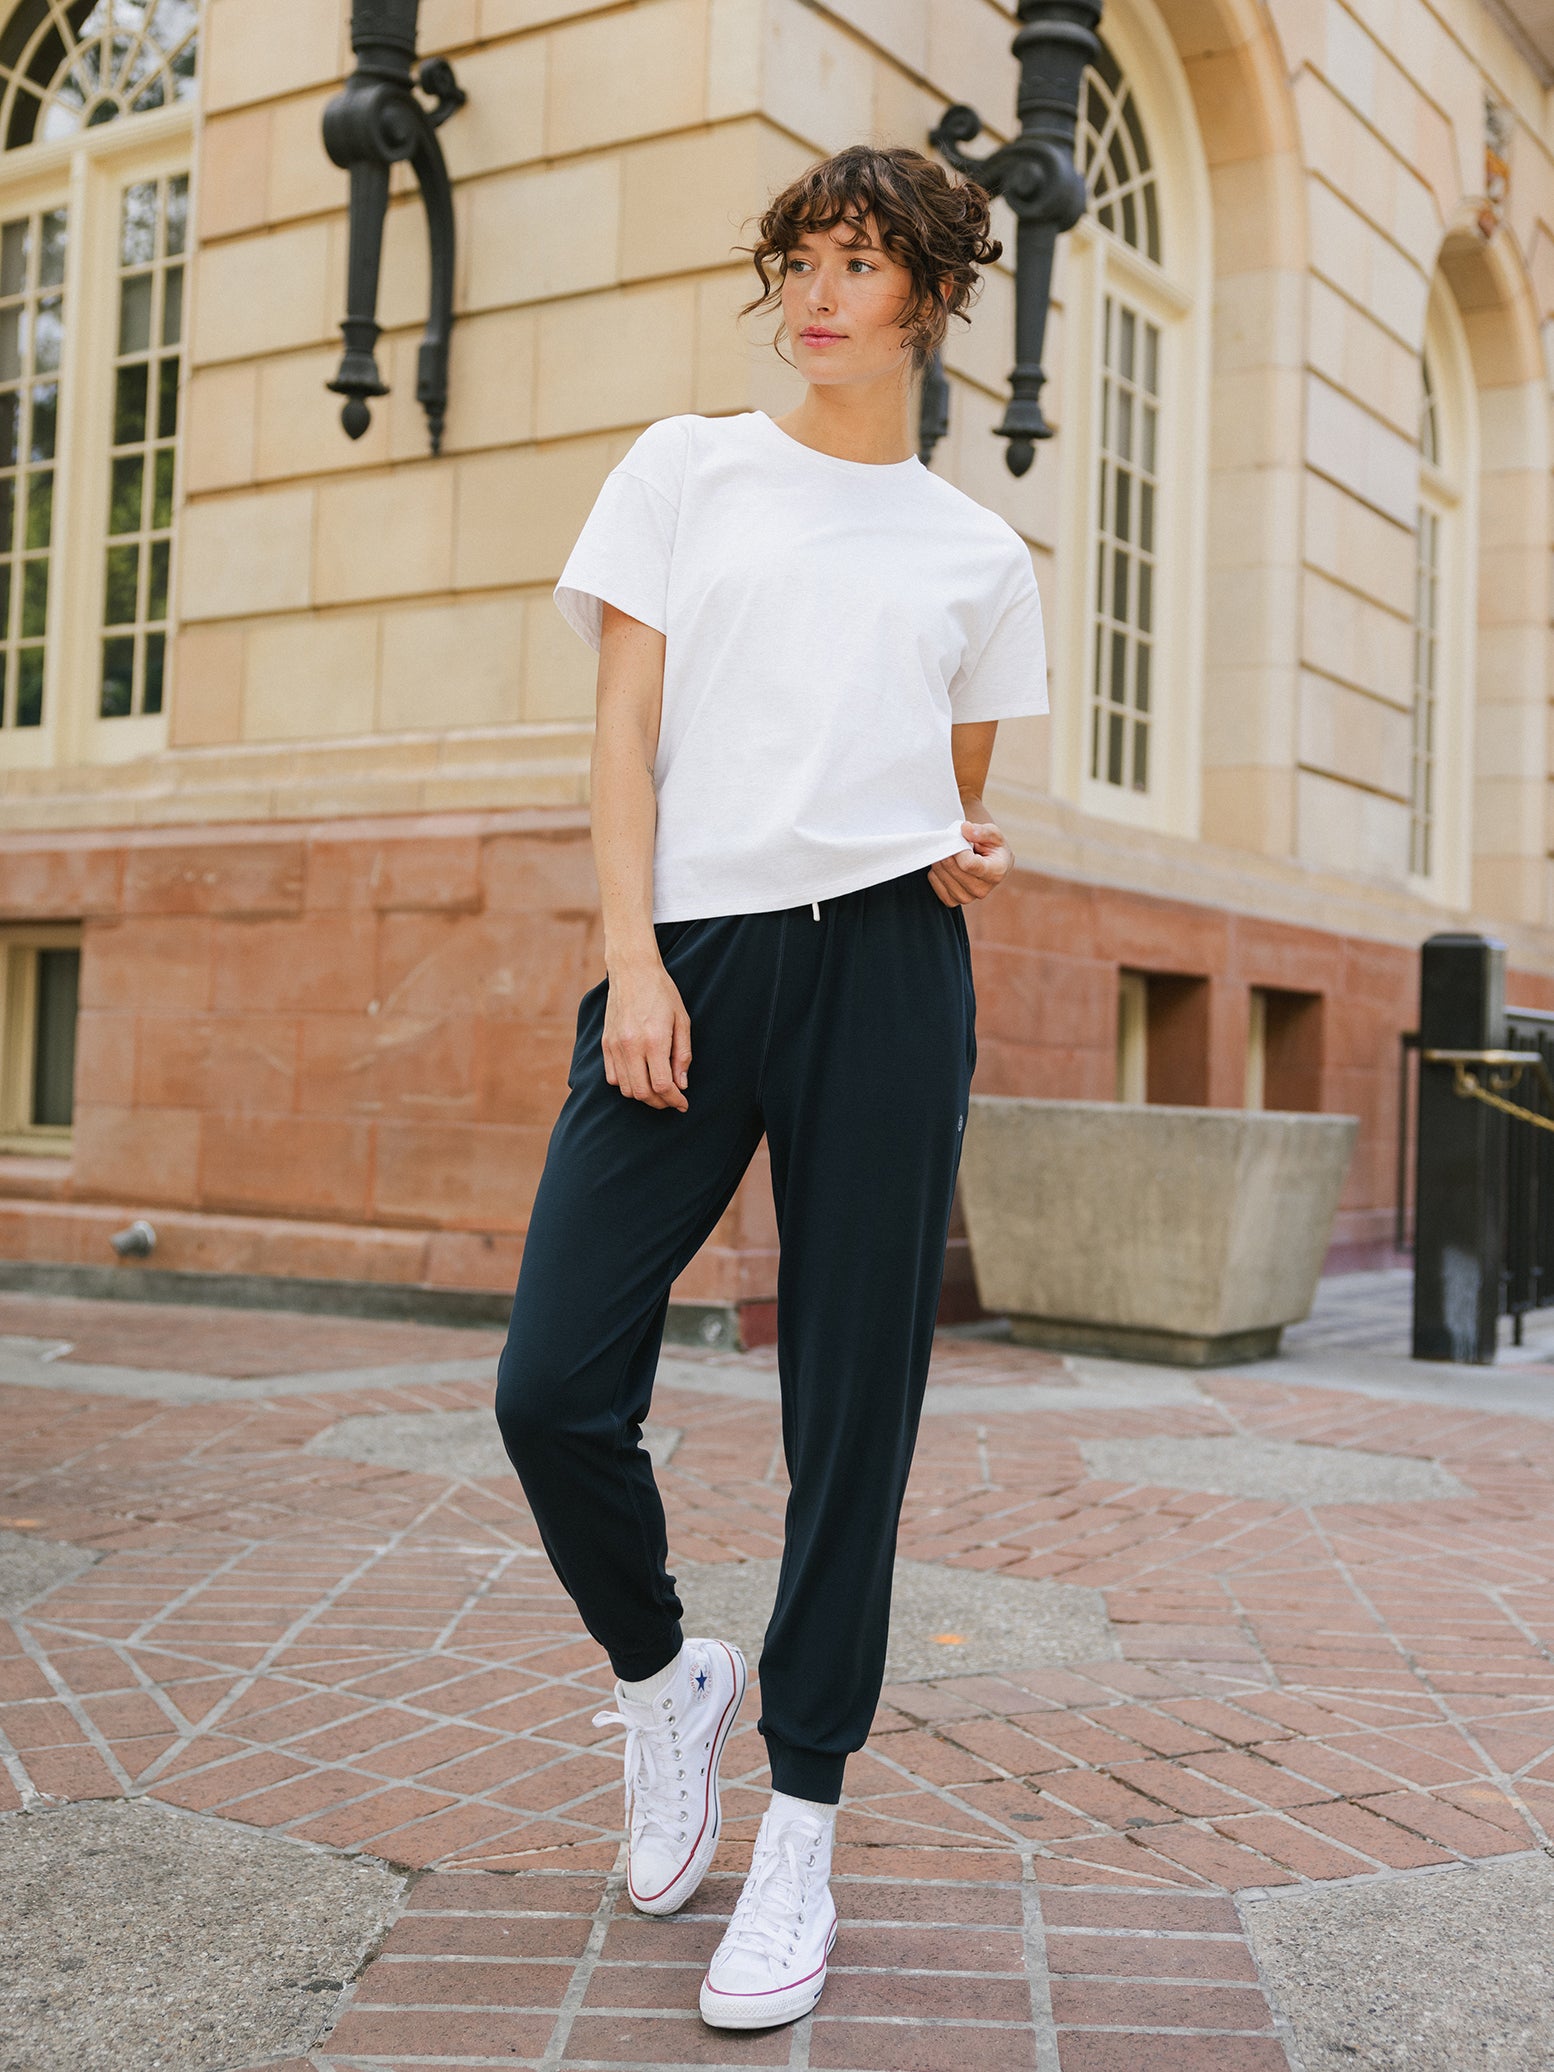 Woman on city sidewalk wearing white tee and black joggers 